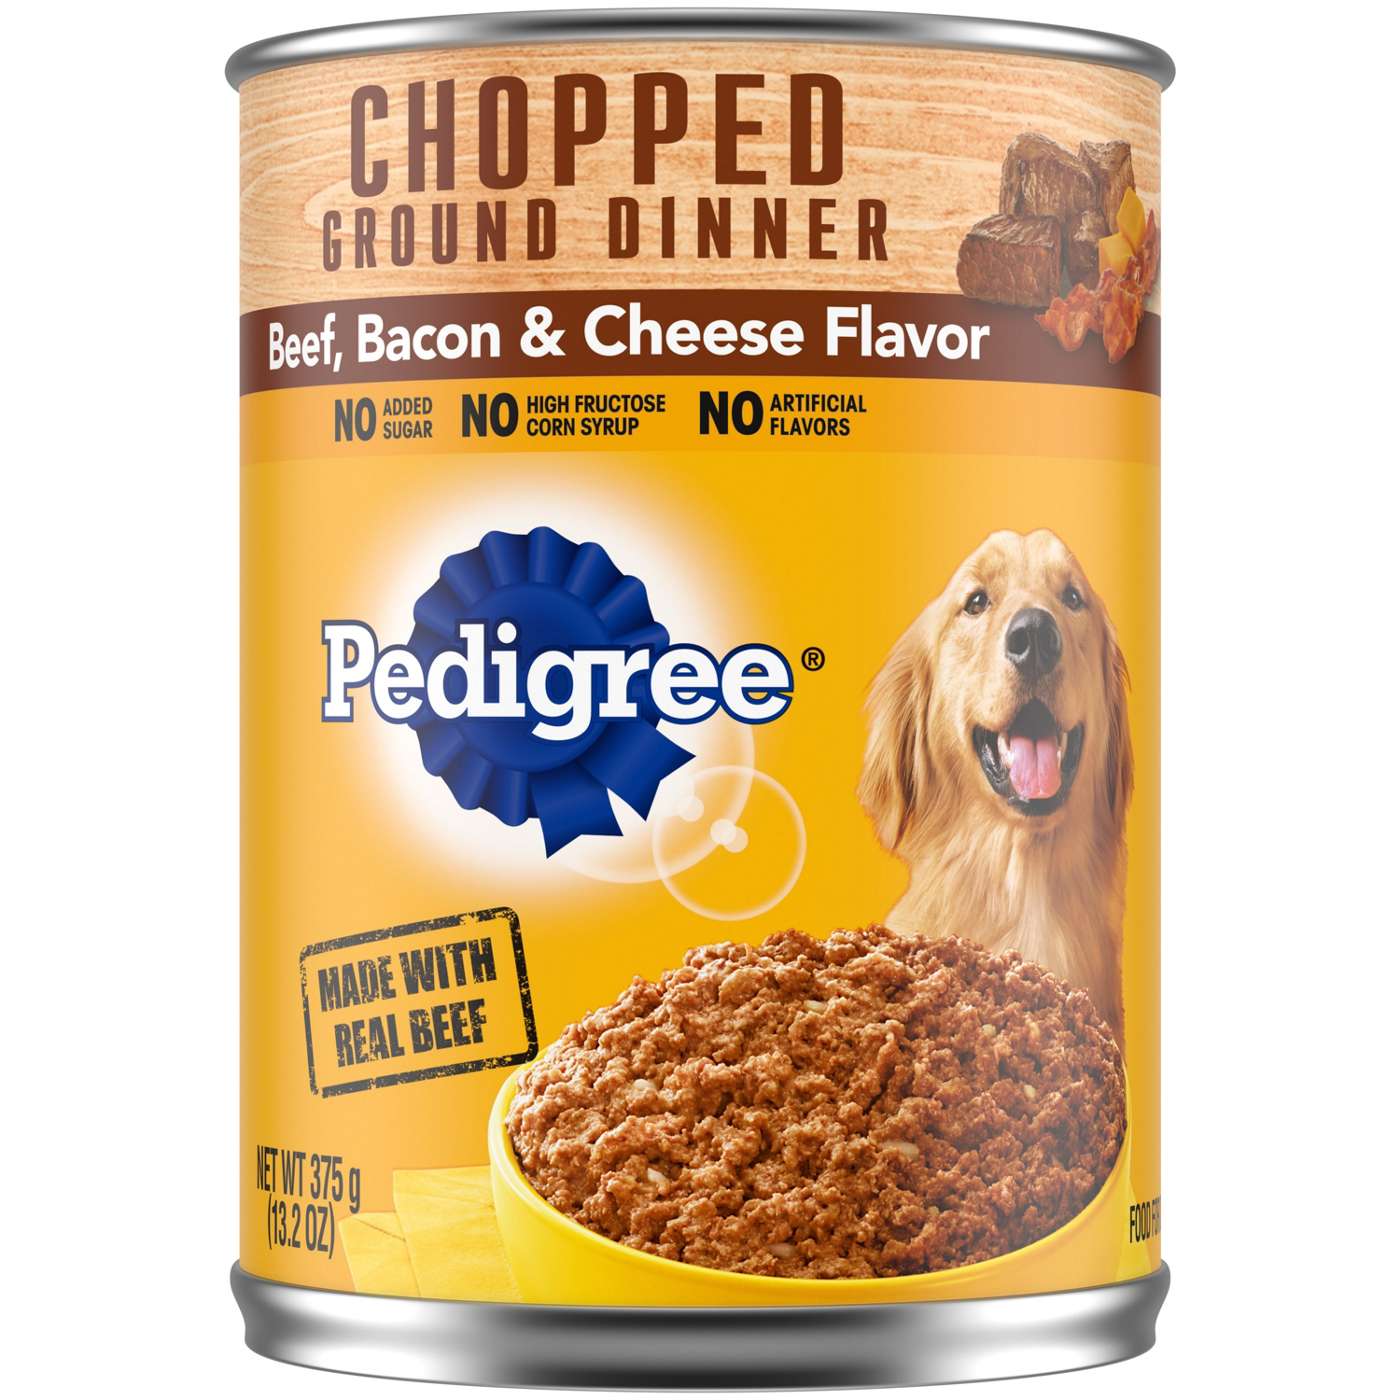 Pedigree Chopped Ground Dinner with Beef Bacon & Cheese Soft Wet Dog Food; image 1 of 5